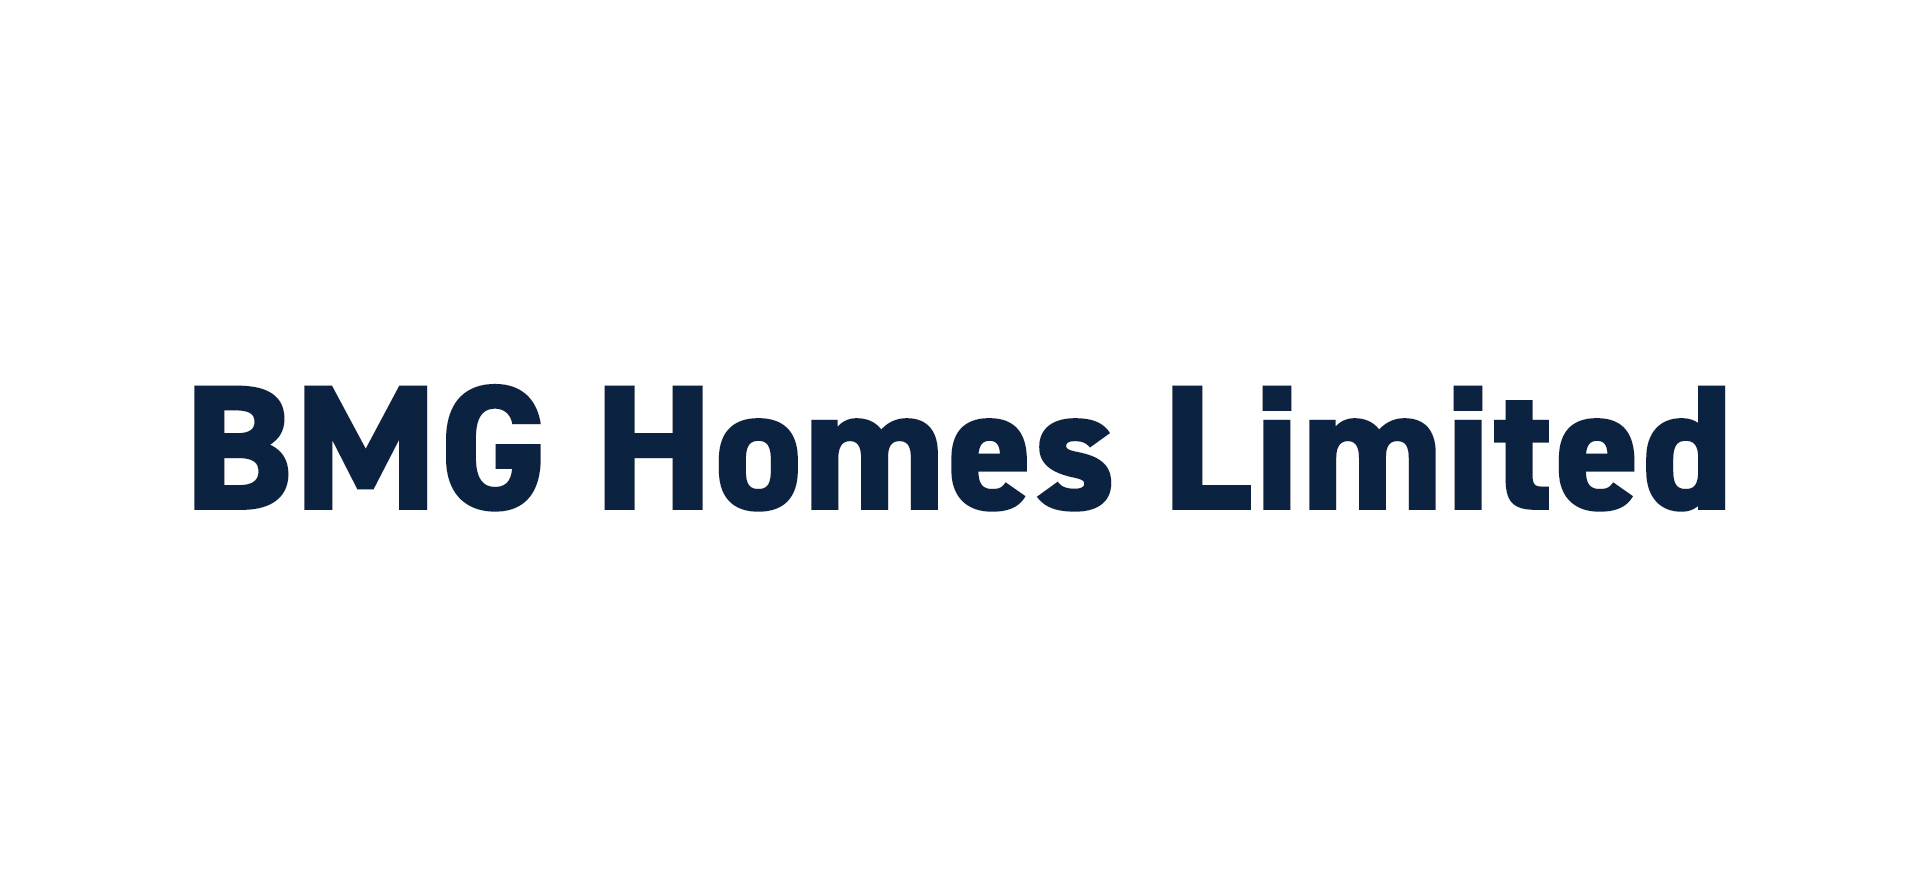 BMG Homes Limited